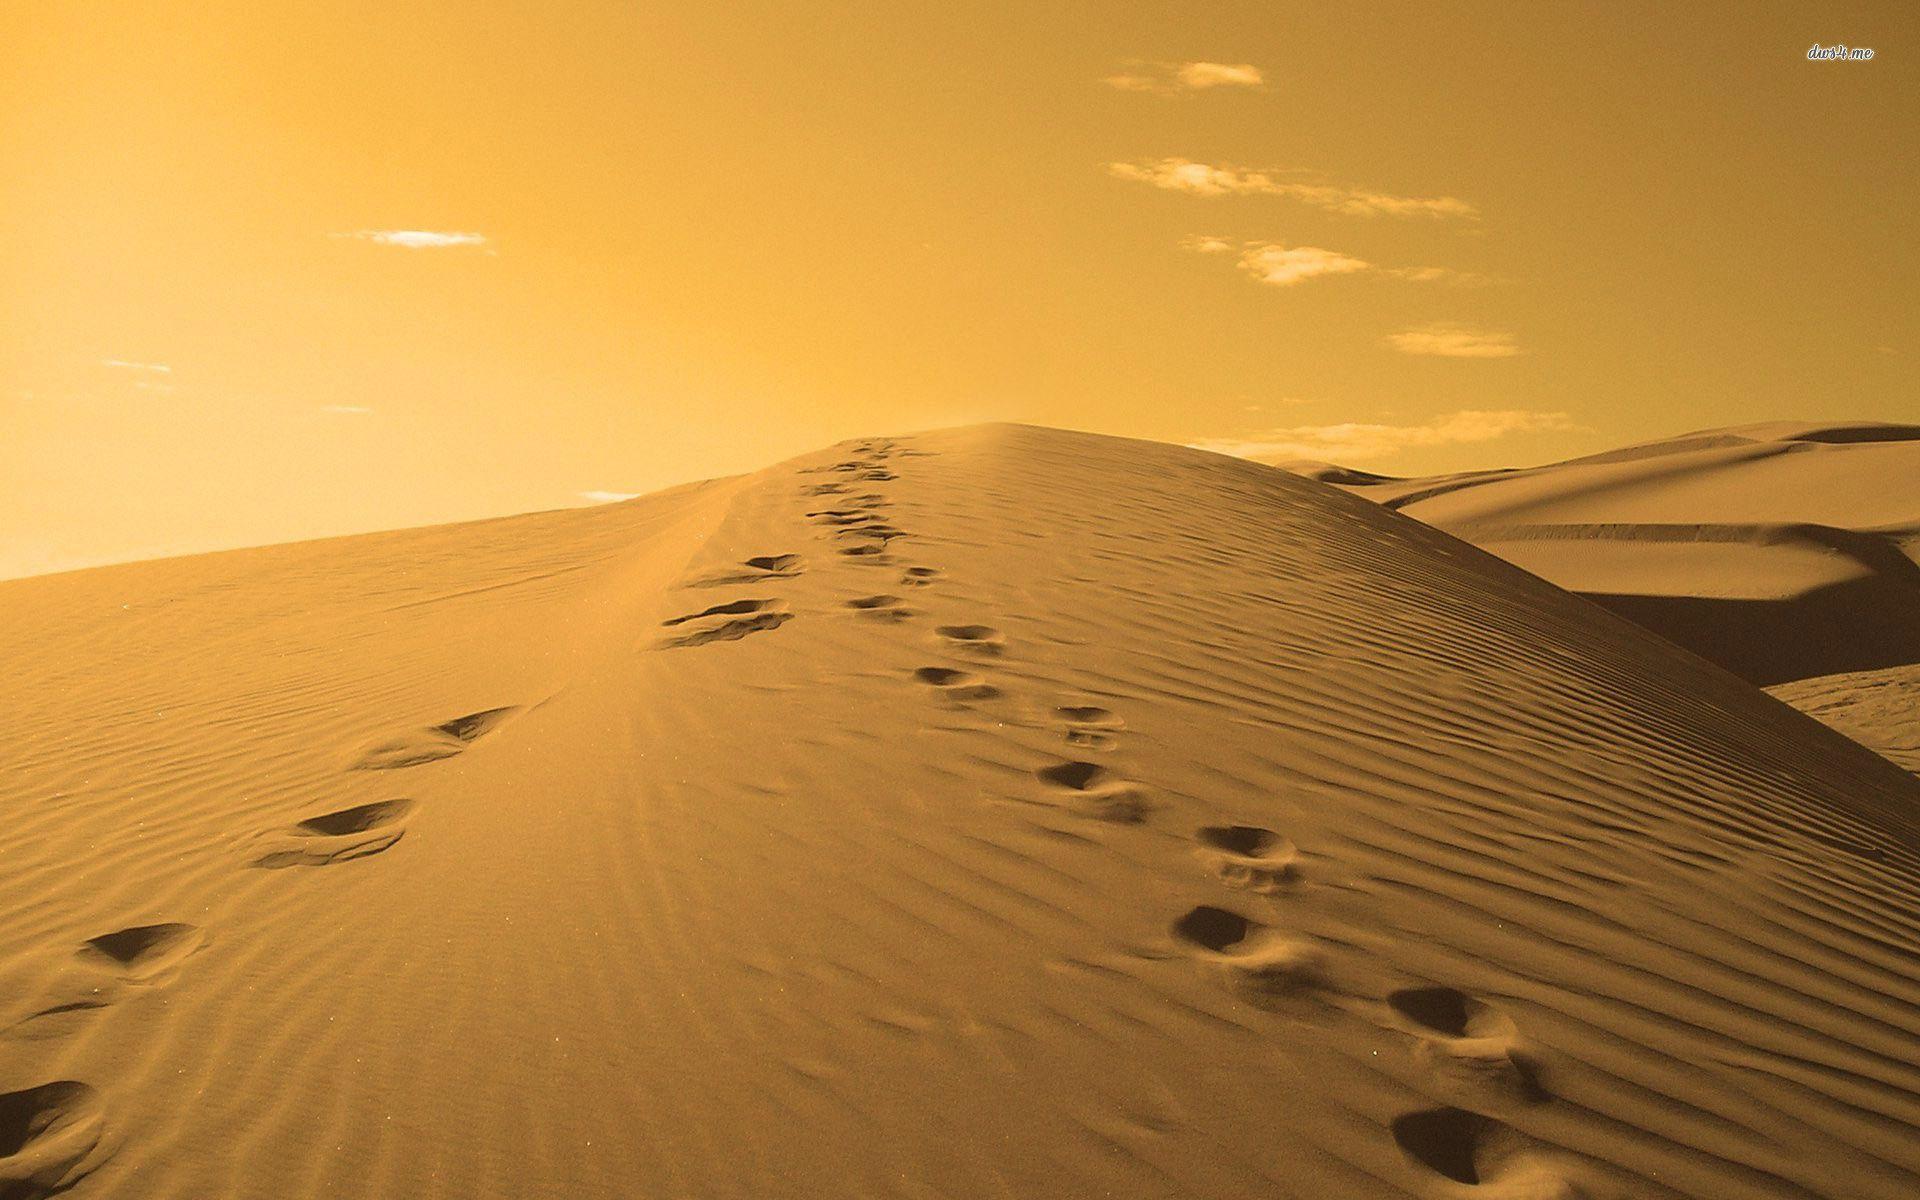 Footprints In The Sand Wallpaper